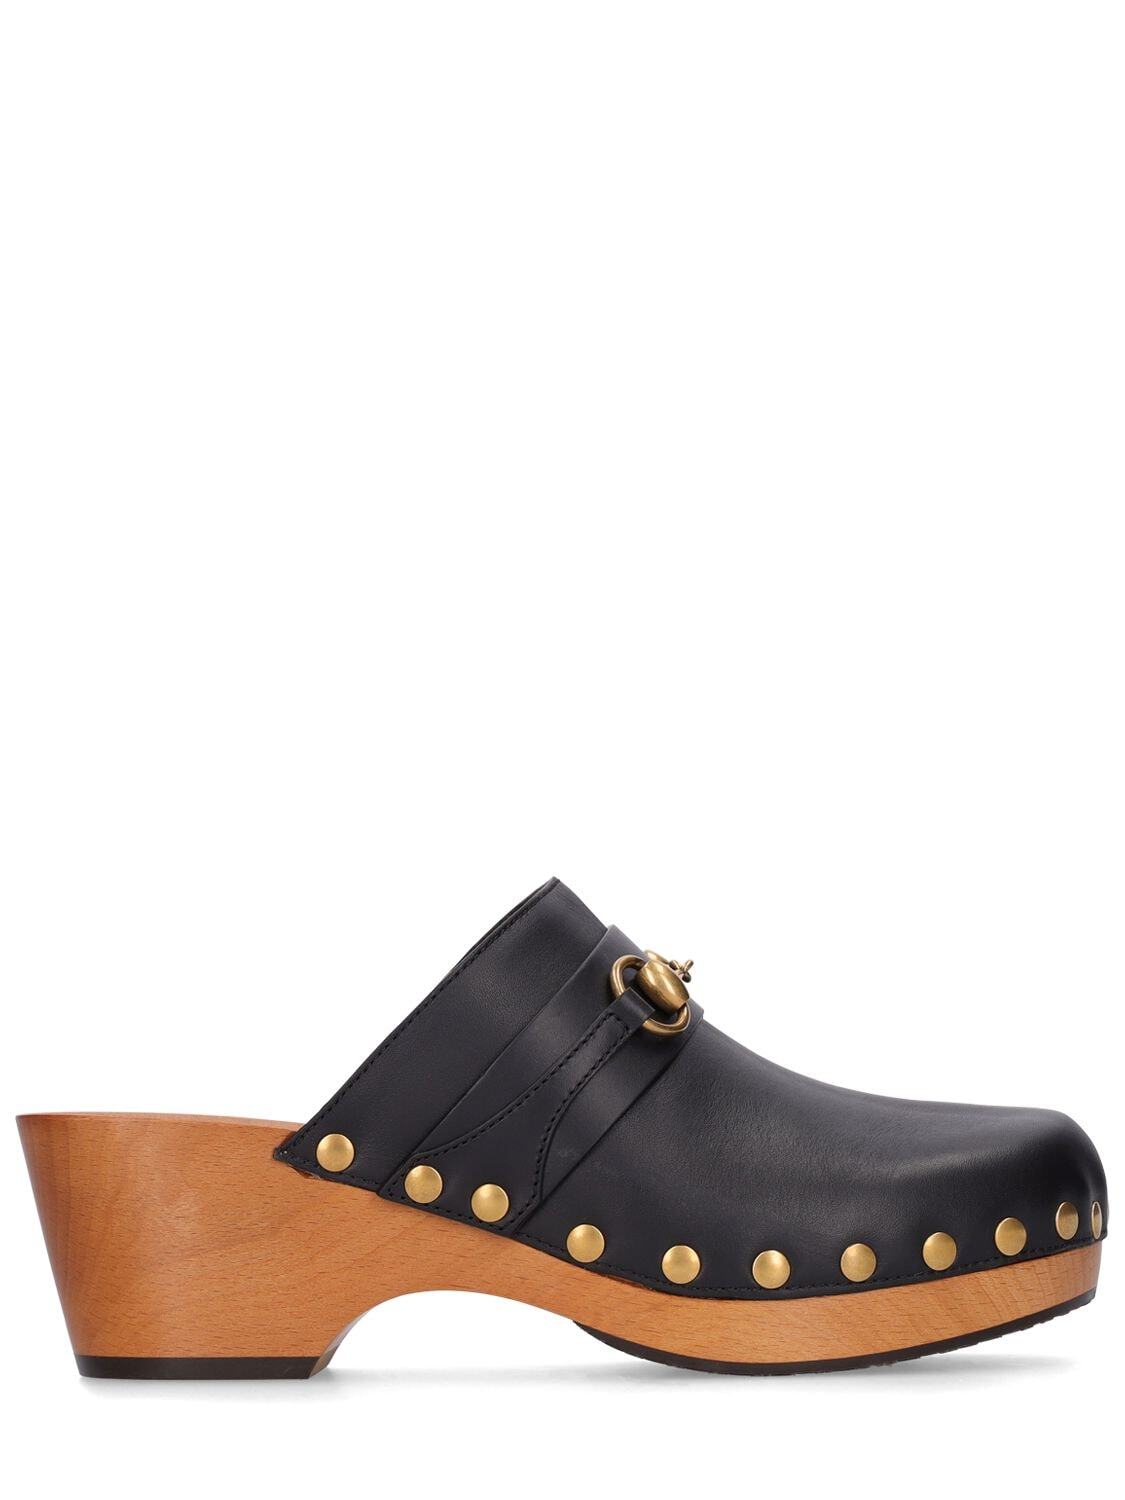 GUCCI 35mm Stann Leather Clogs in black